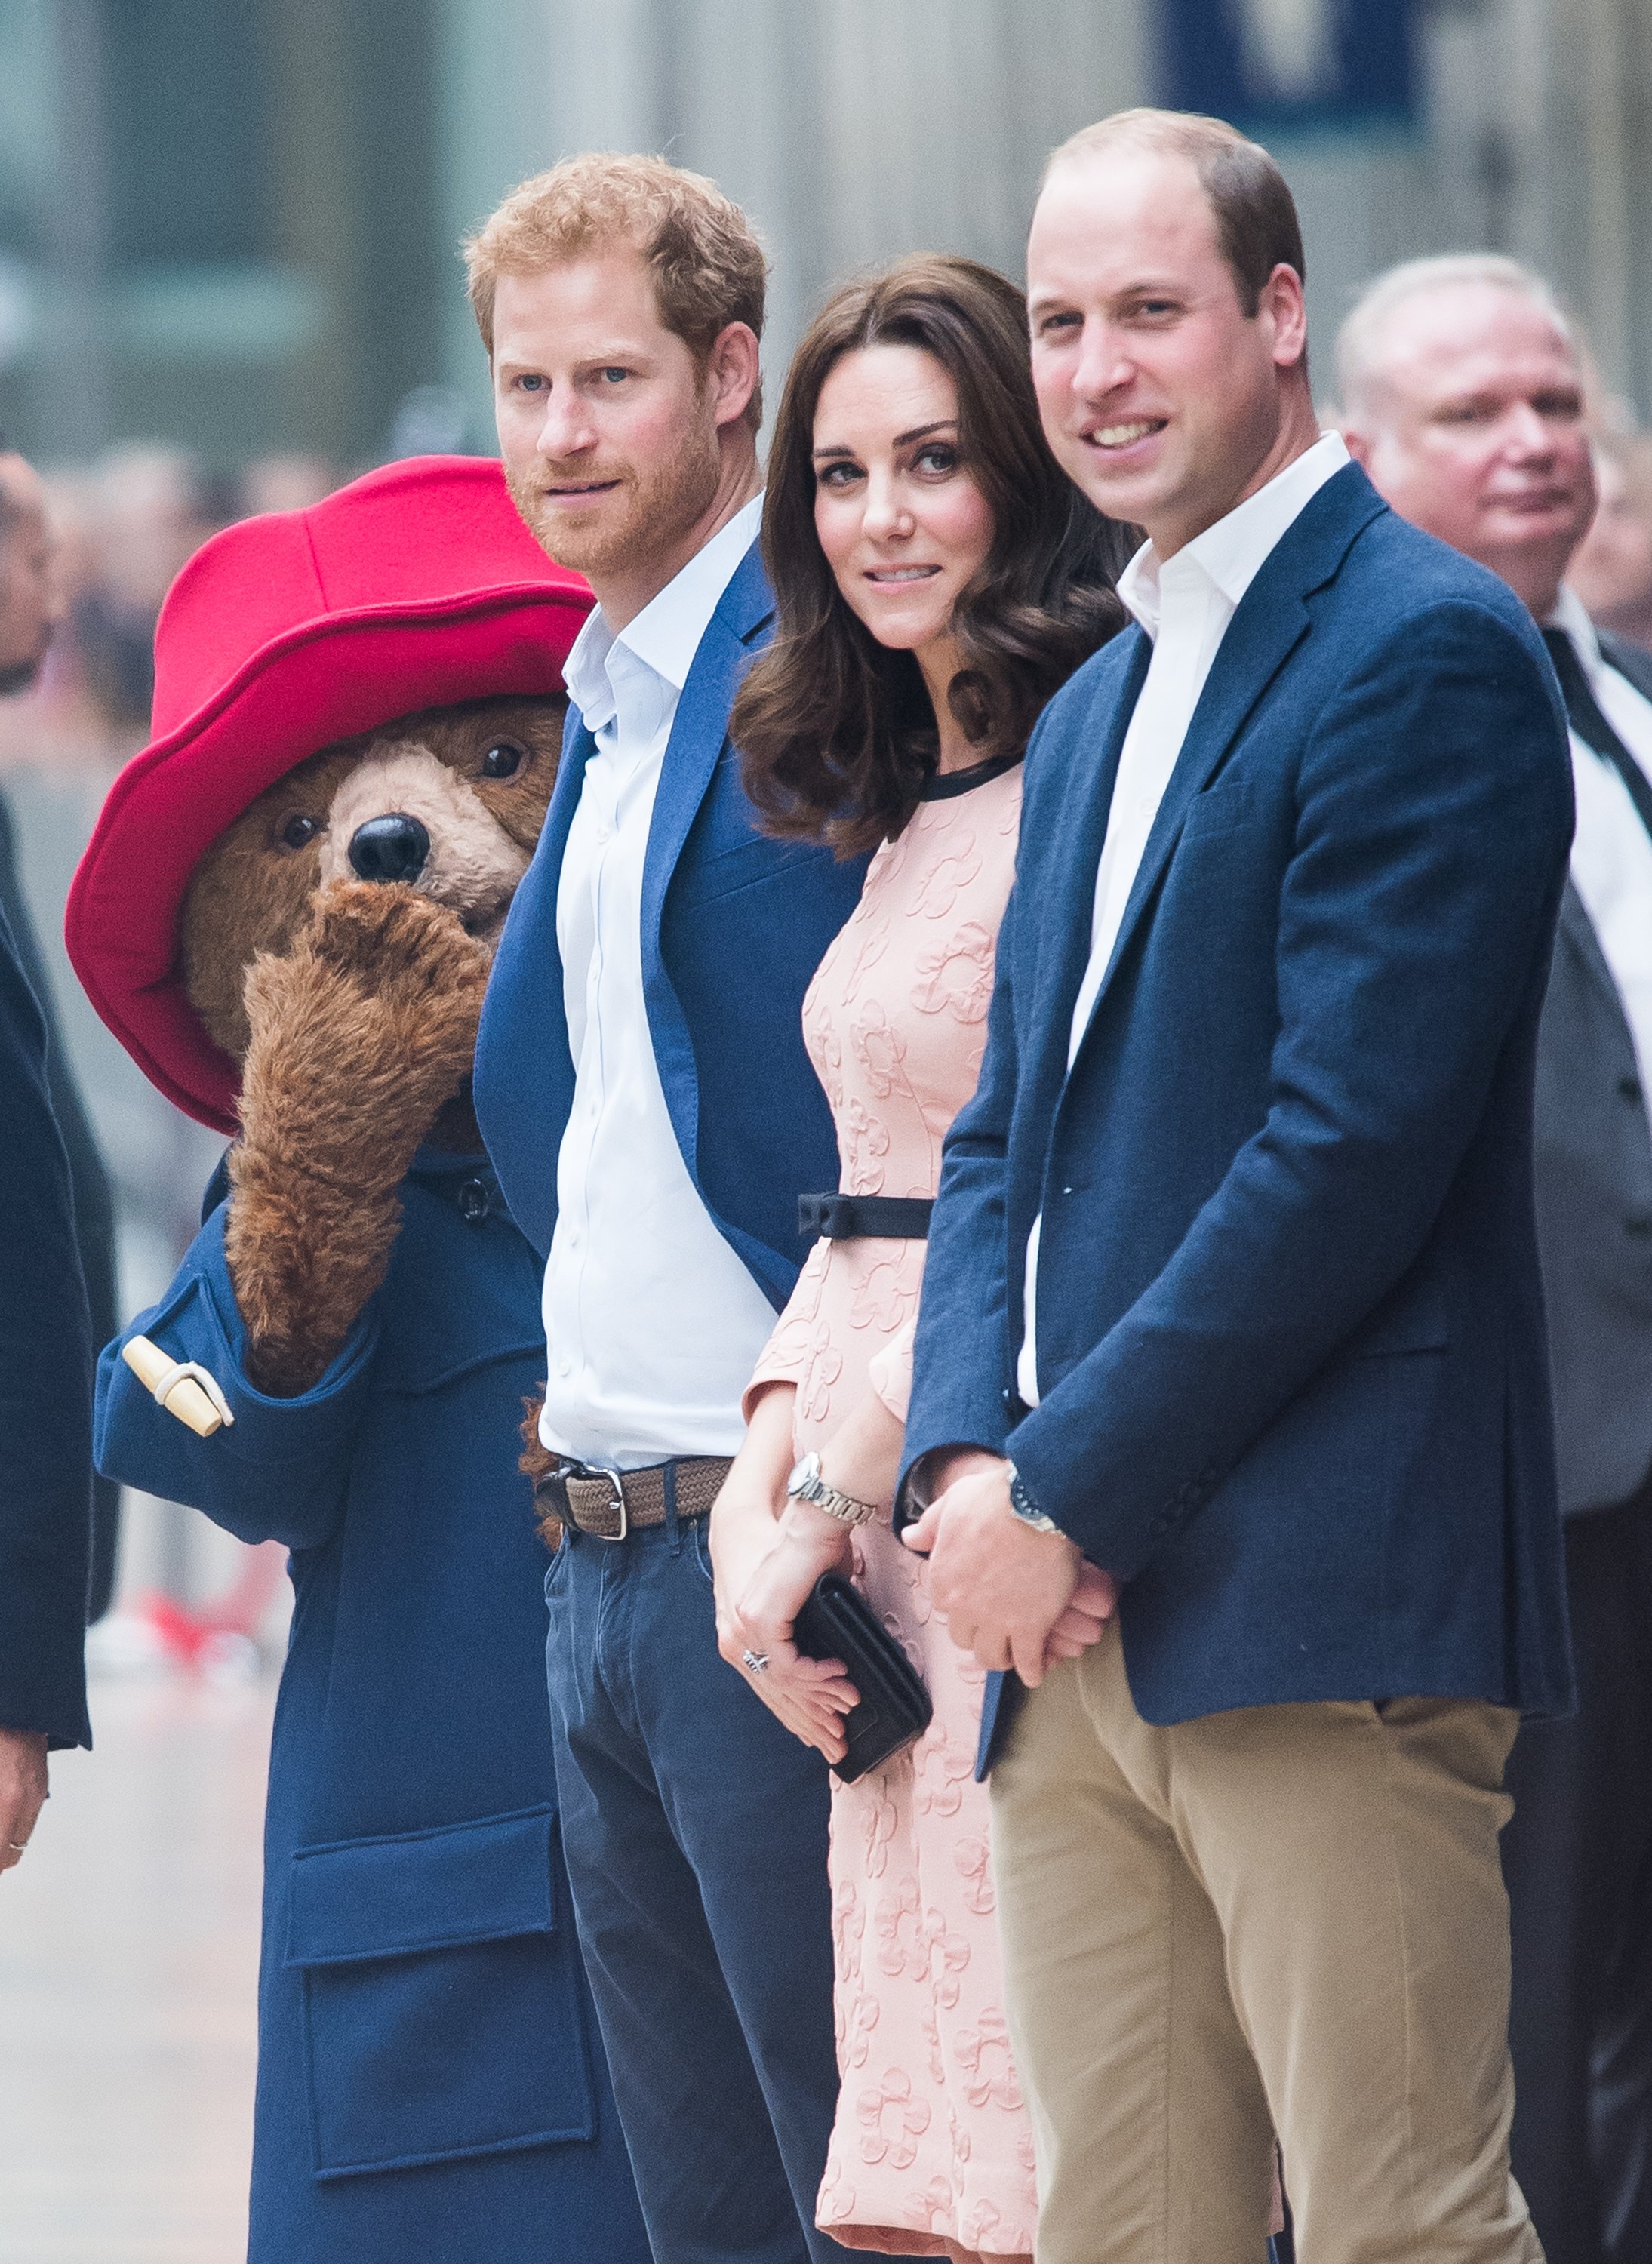 Paddington Bear, Prince Harry, Kate Middleton and Prince William during the Charities Forum Event at Paddington Station on October 16, 2017 in London, England. | Source: Getty Images